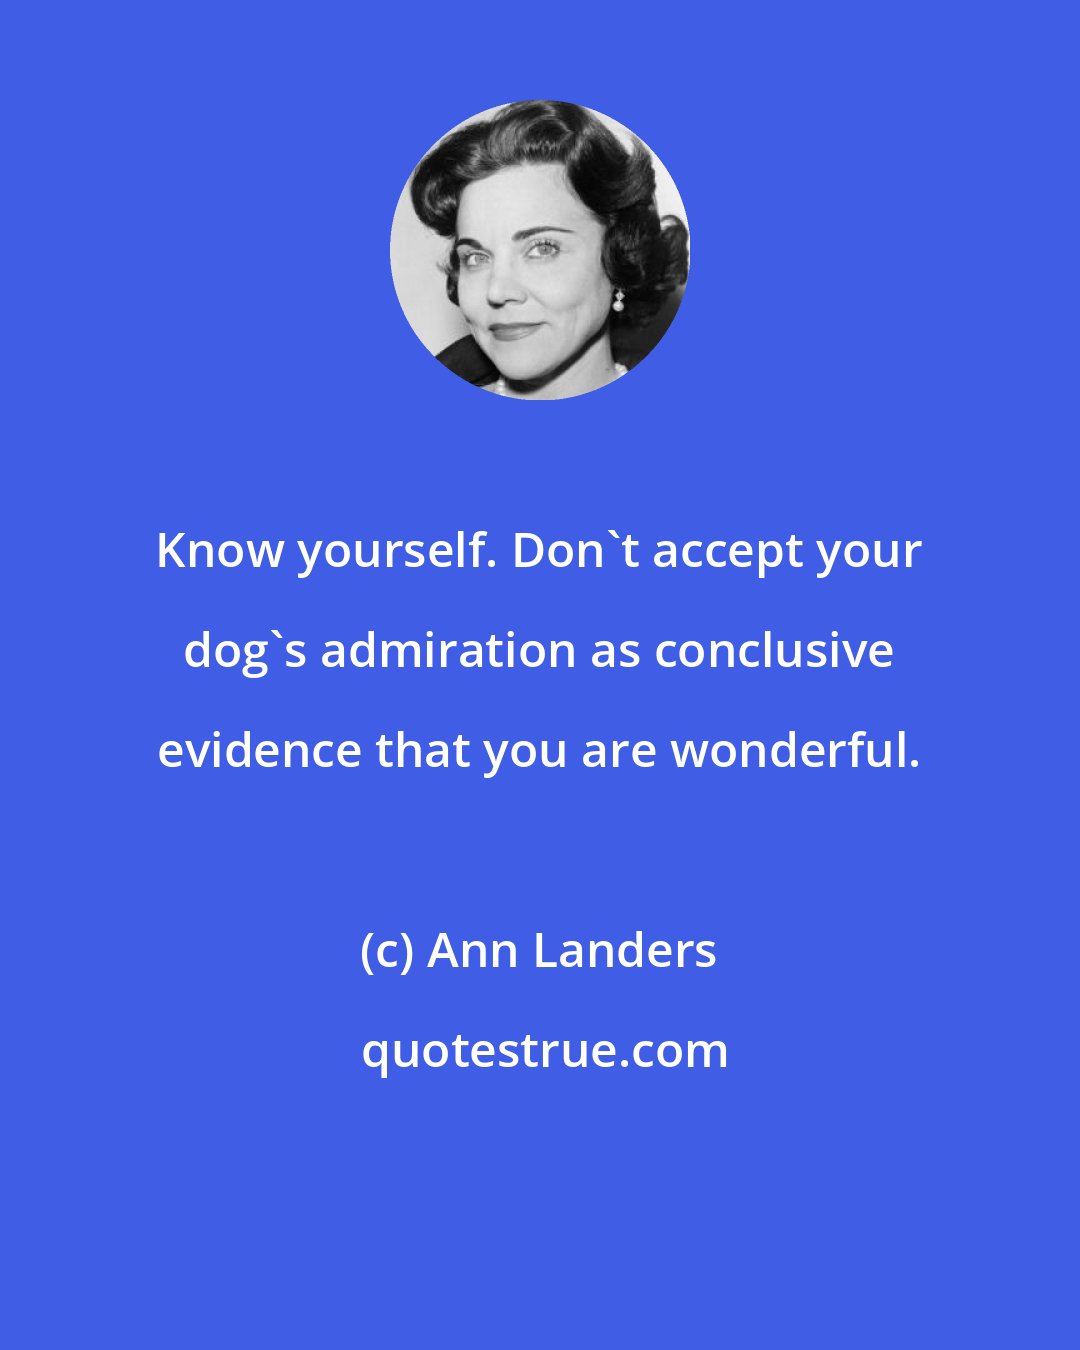 Ann Landers: Know yourself. Don't accept your dog's admiration as conclusive evidence that you are wonderful.